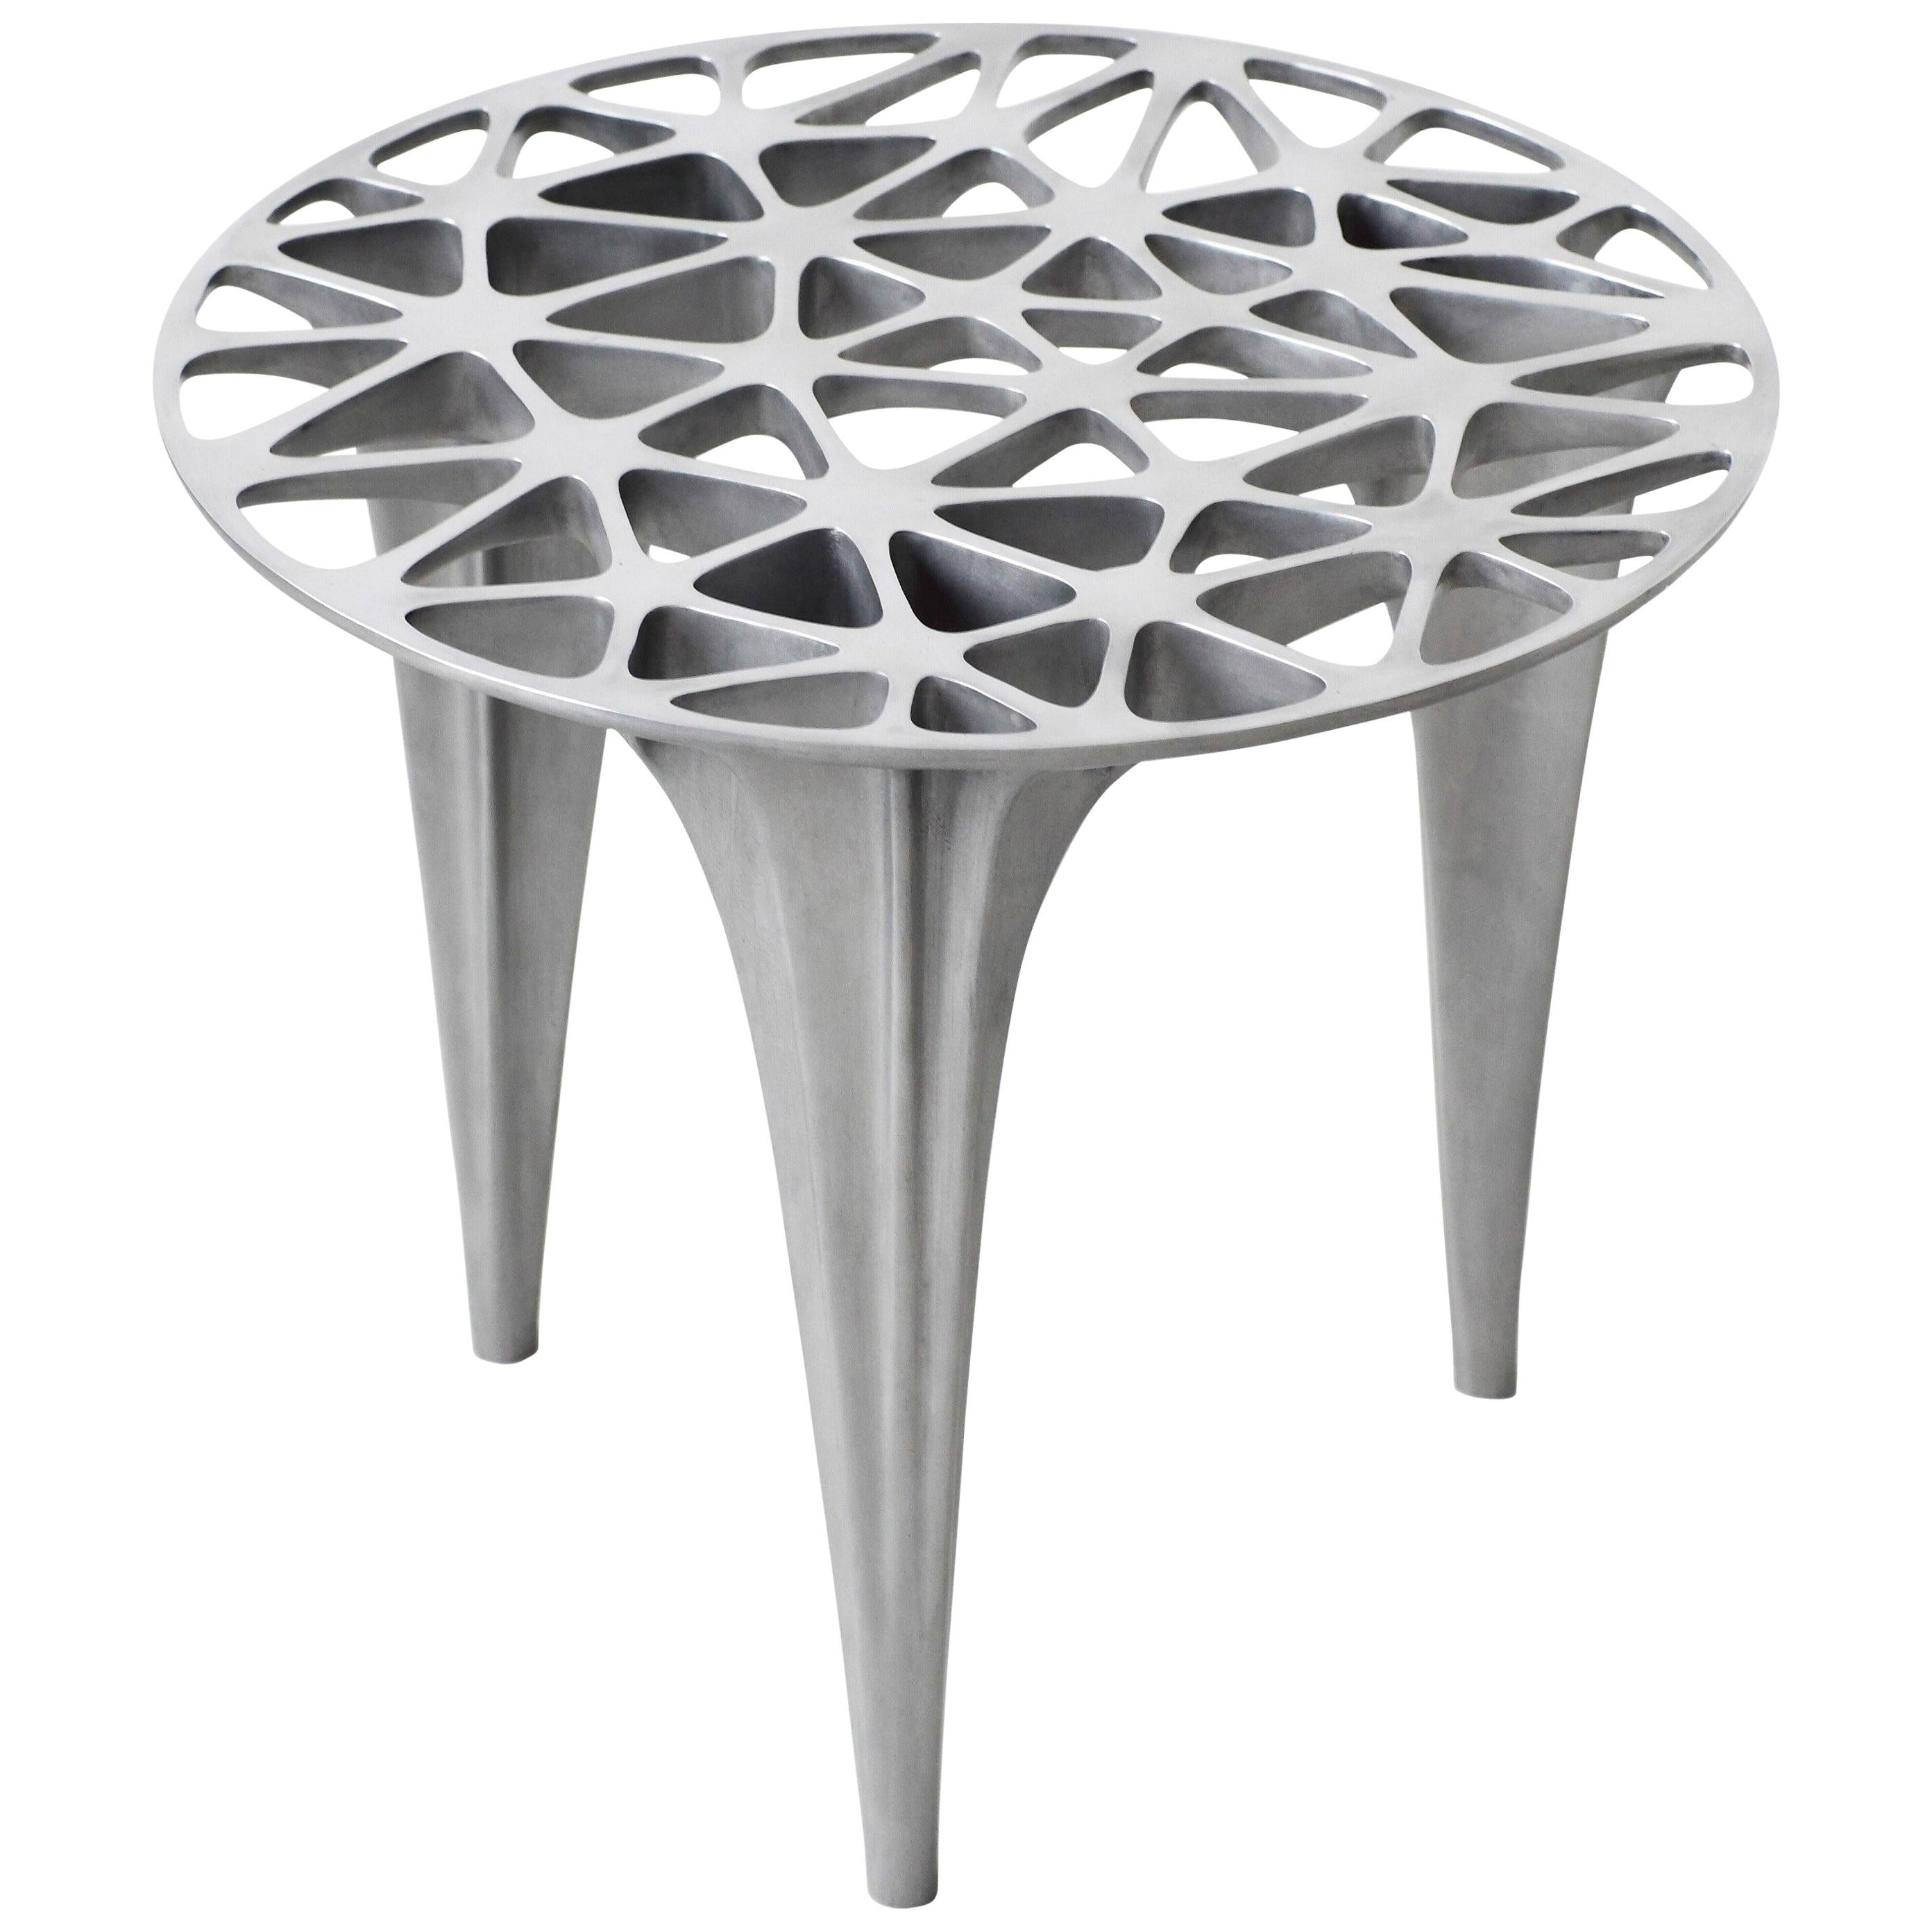 Sedona Small Side Table or Side Stool Polished or Brushed Stainless Steel For Sale